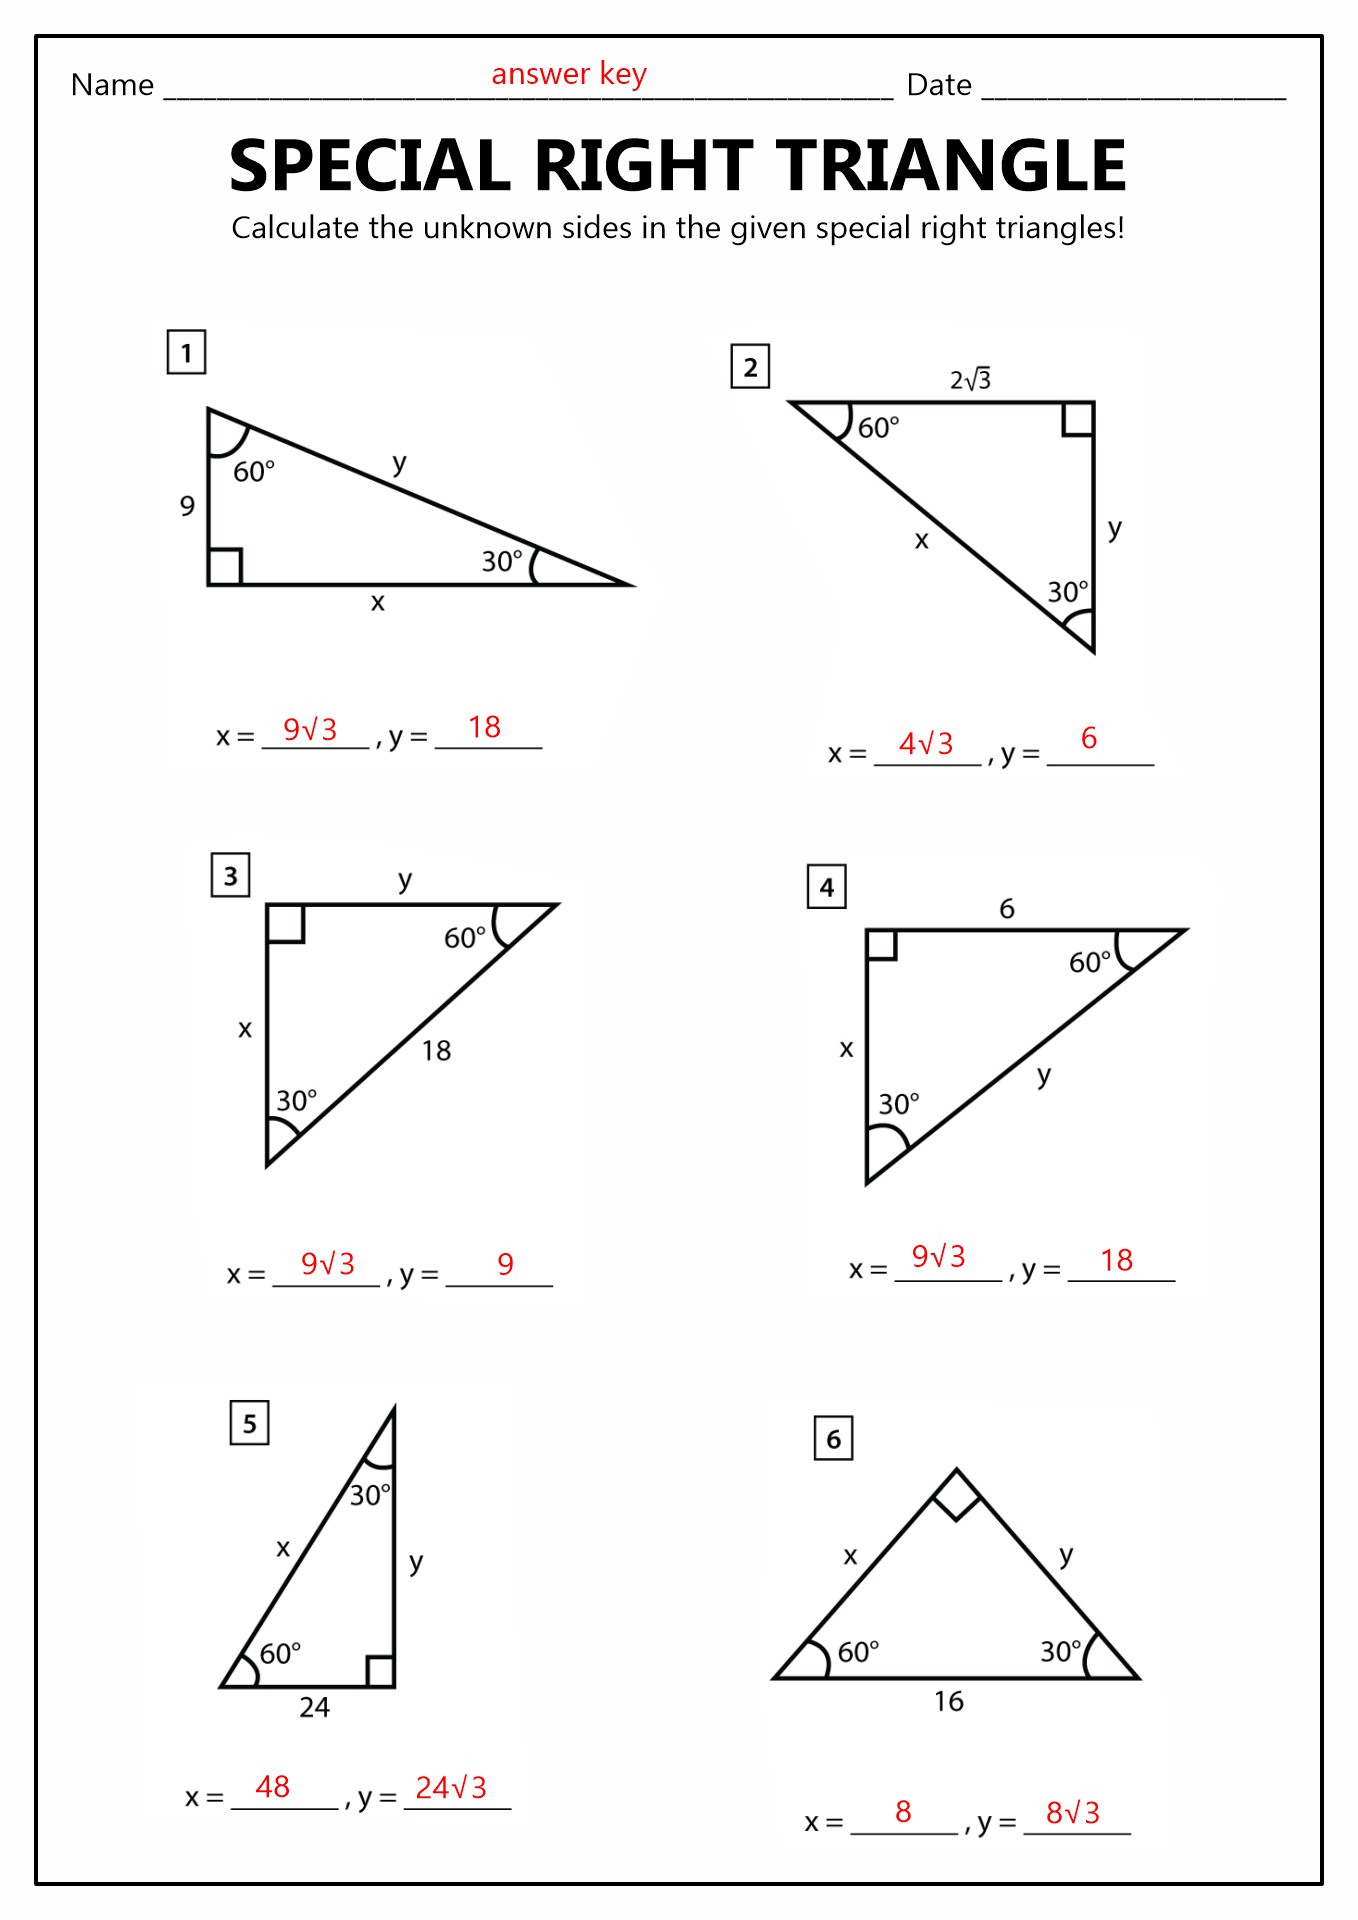 Right Triangles in Trig Ratios Worksheet Answers